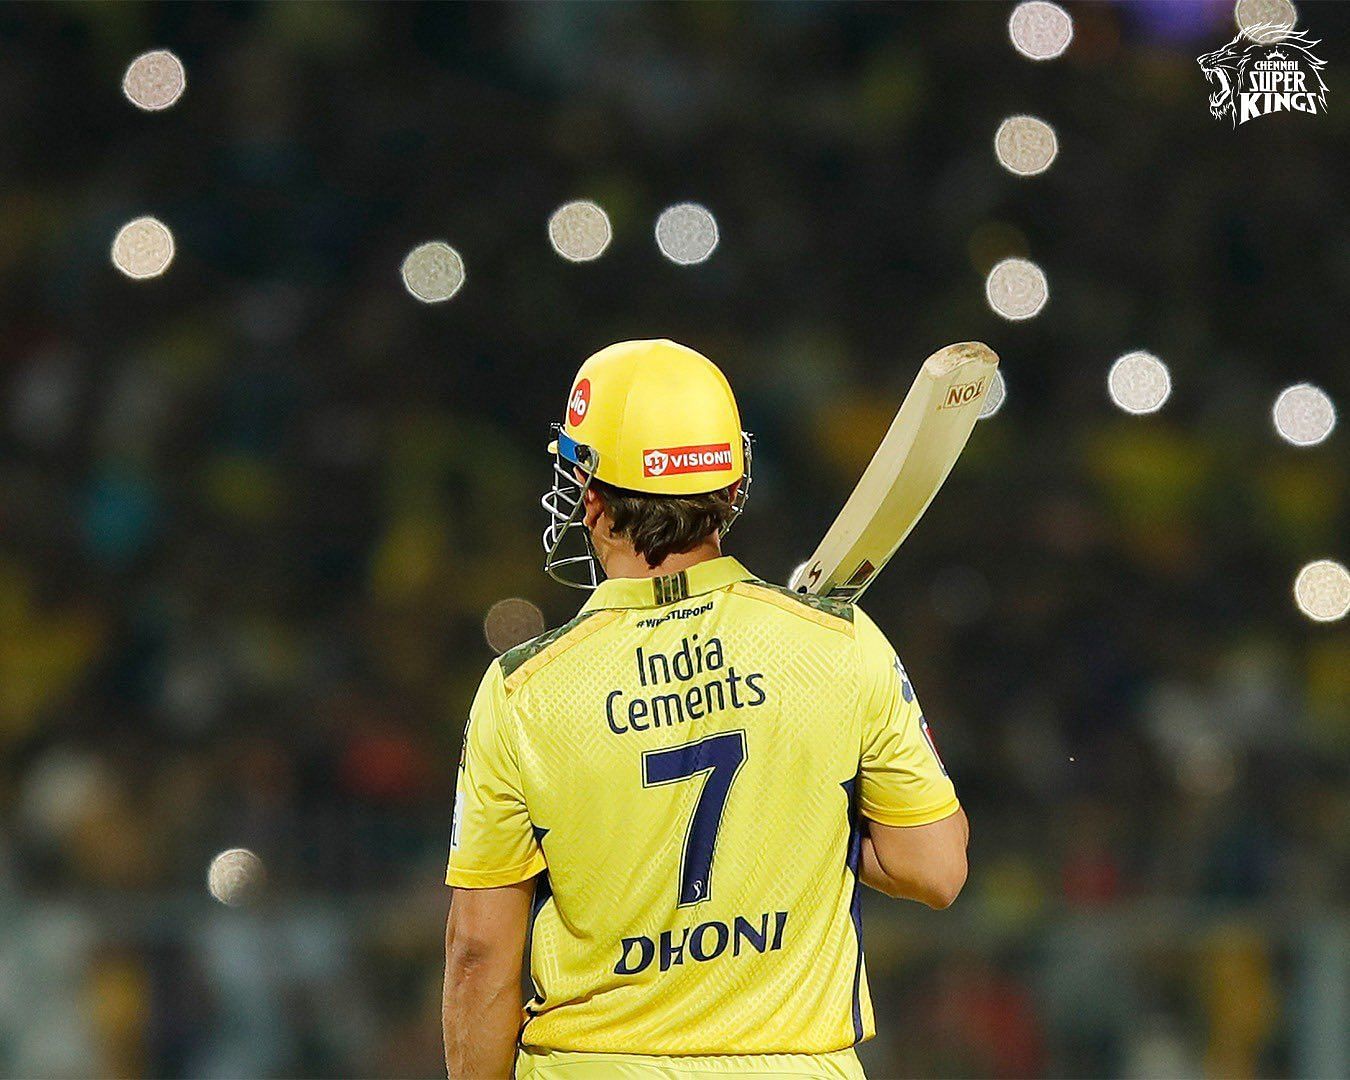 MS Dhoni has scored 61 runs so far in IPL 2023 at an astounding strike-rate of 196.77 [Credits: CSK]